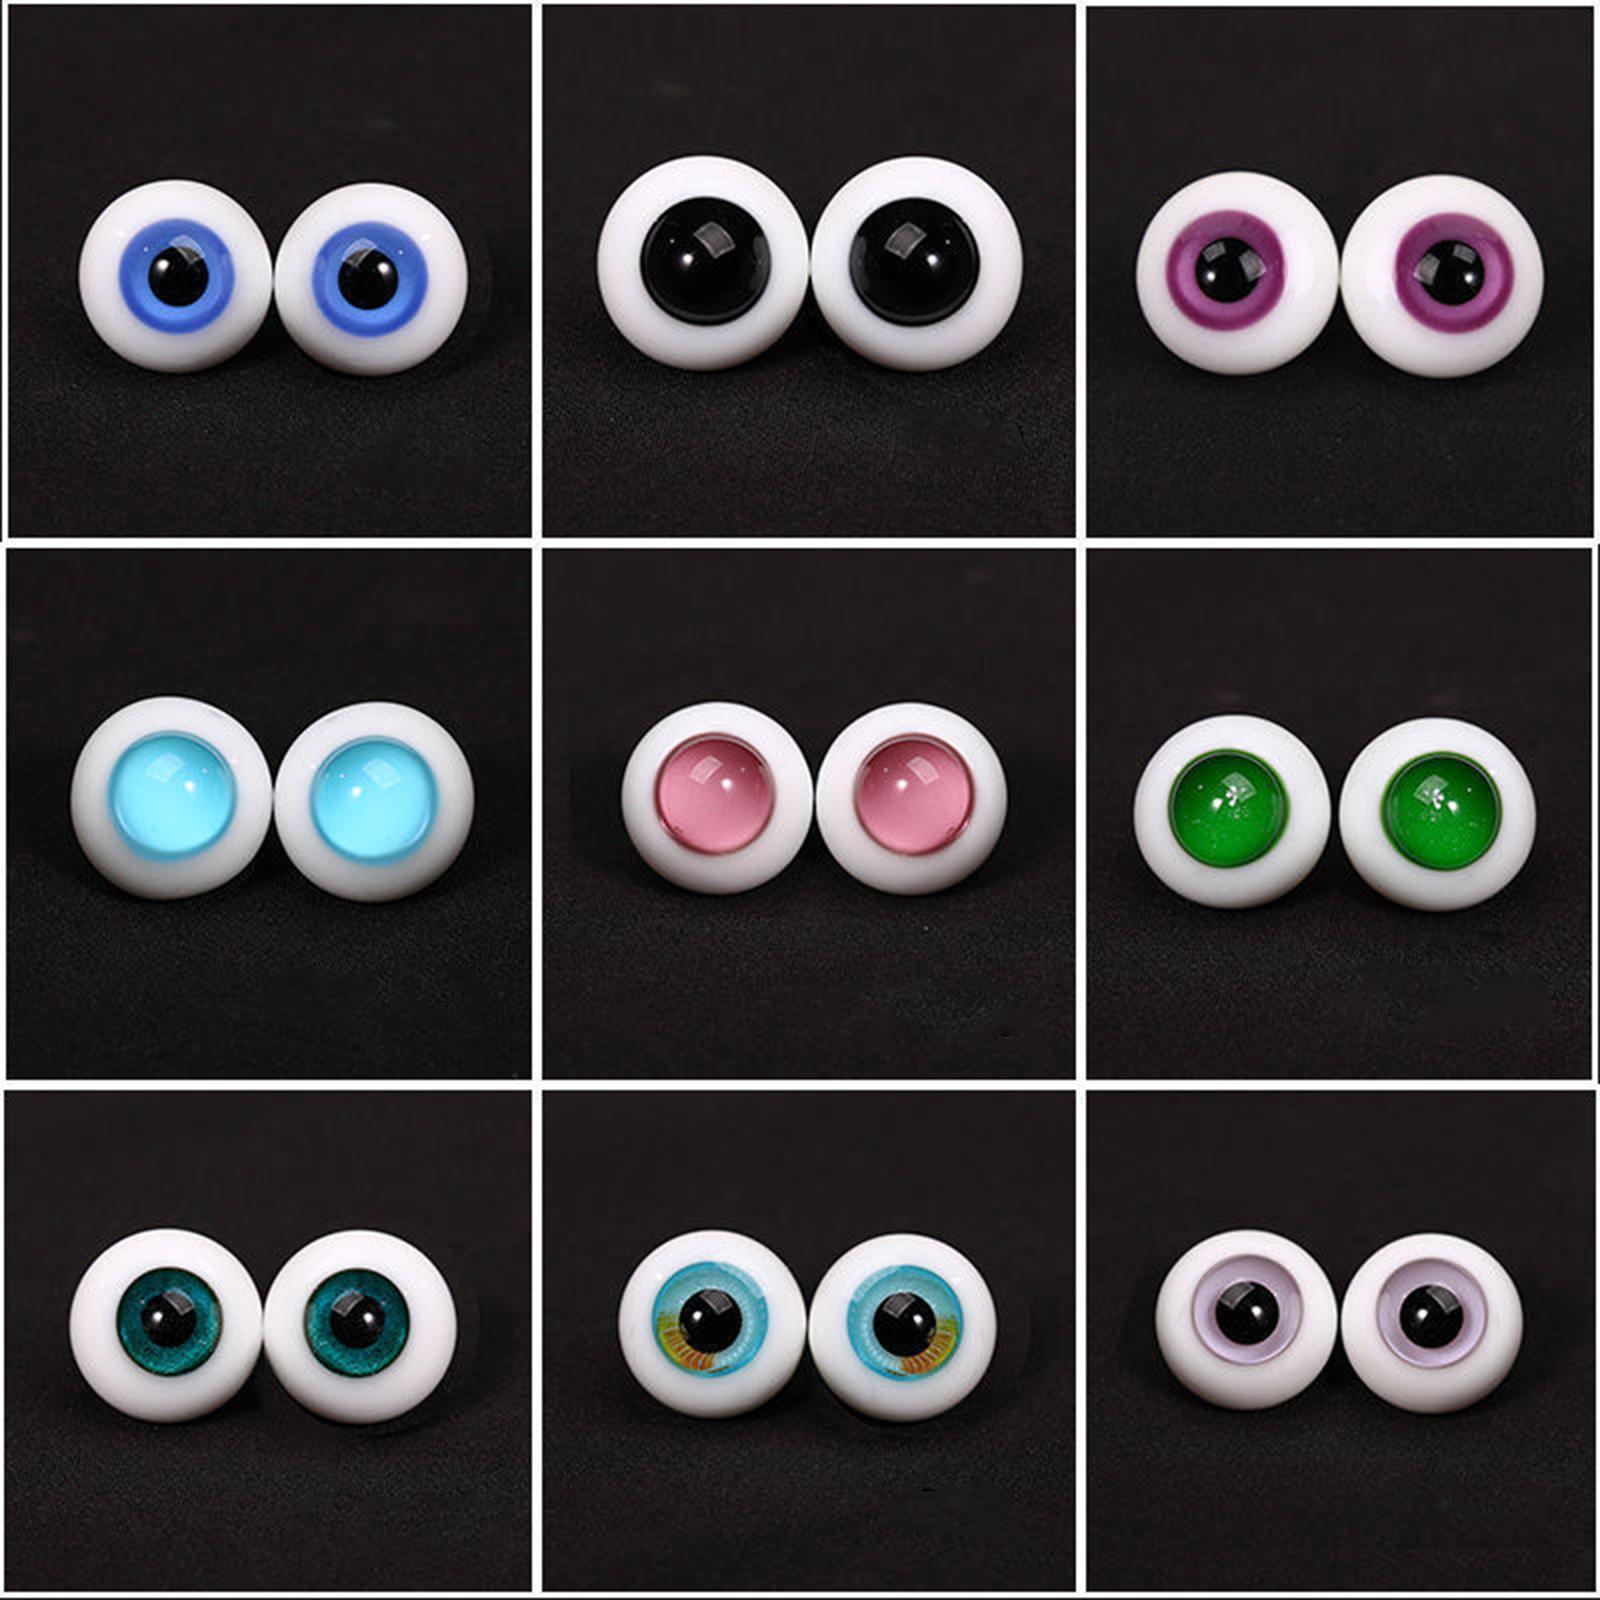 2x Doll Eyes Wiggle Eyes for Halloween Props Sculpture Doll